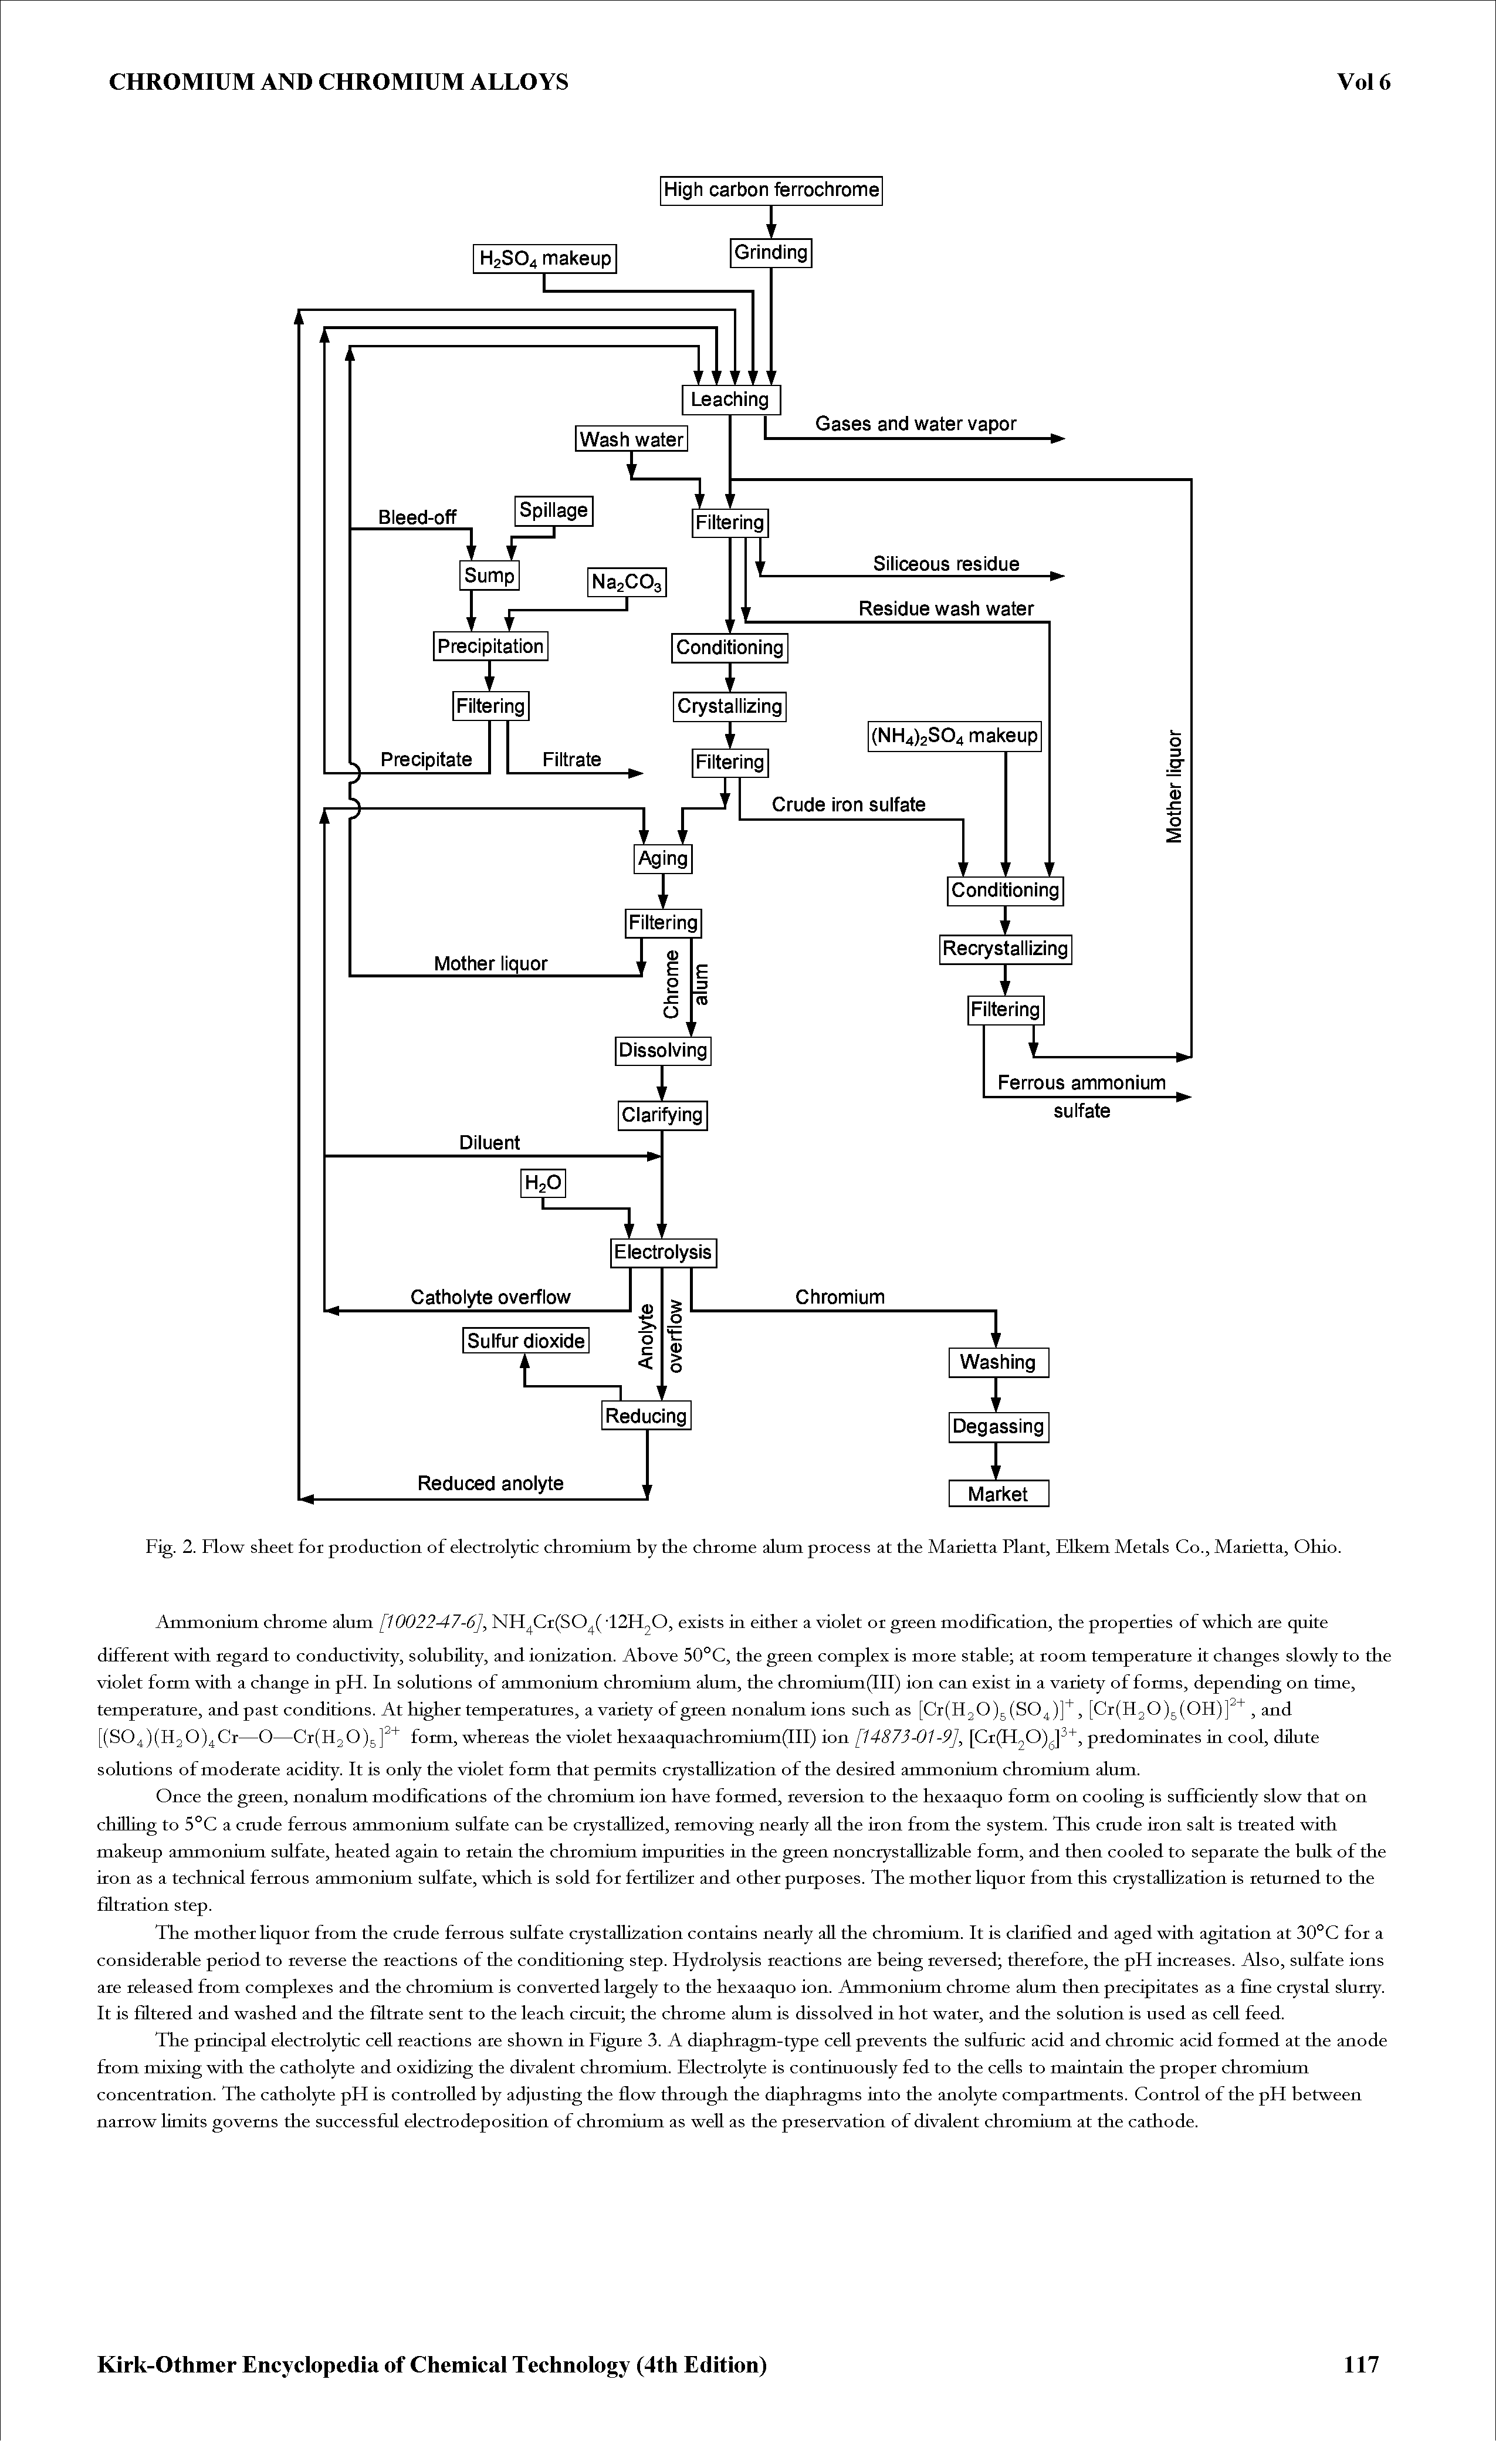 Fig. 2. Flow sheet for production of electrolytic chromium by the chrome alum process at the Marietta Plant, Flkem Metals Co., Marietta, Ohio.